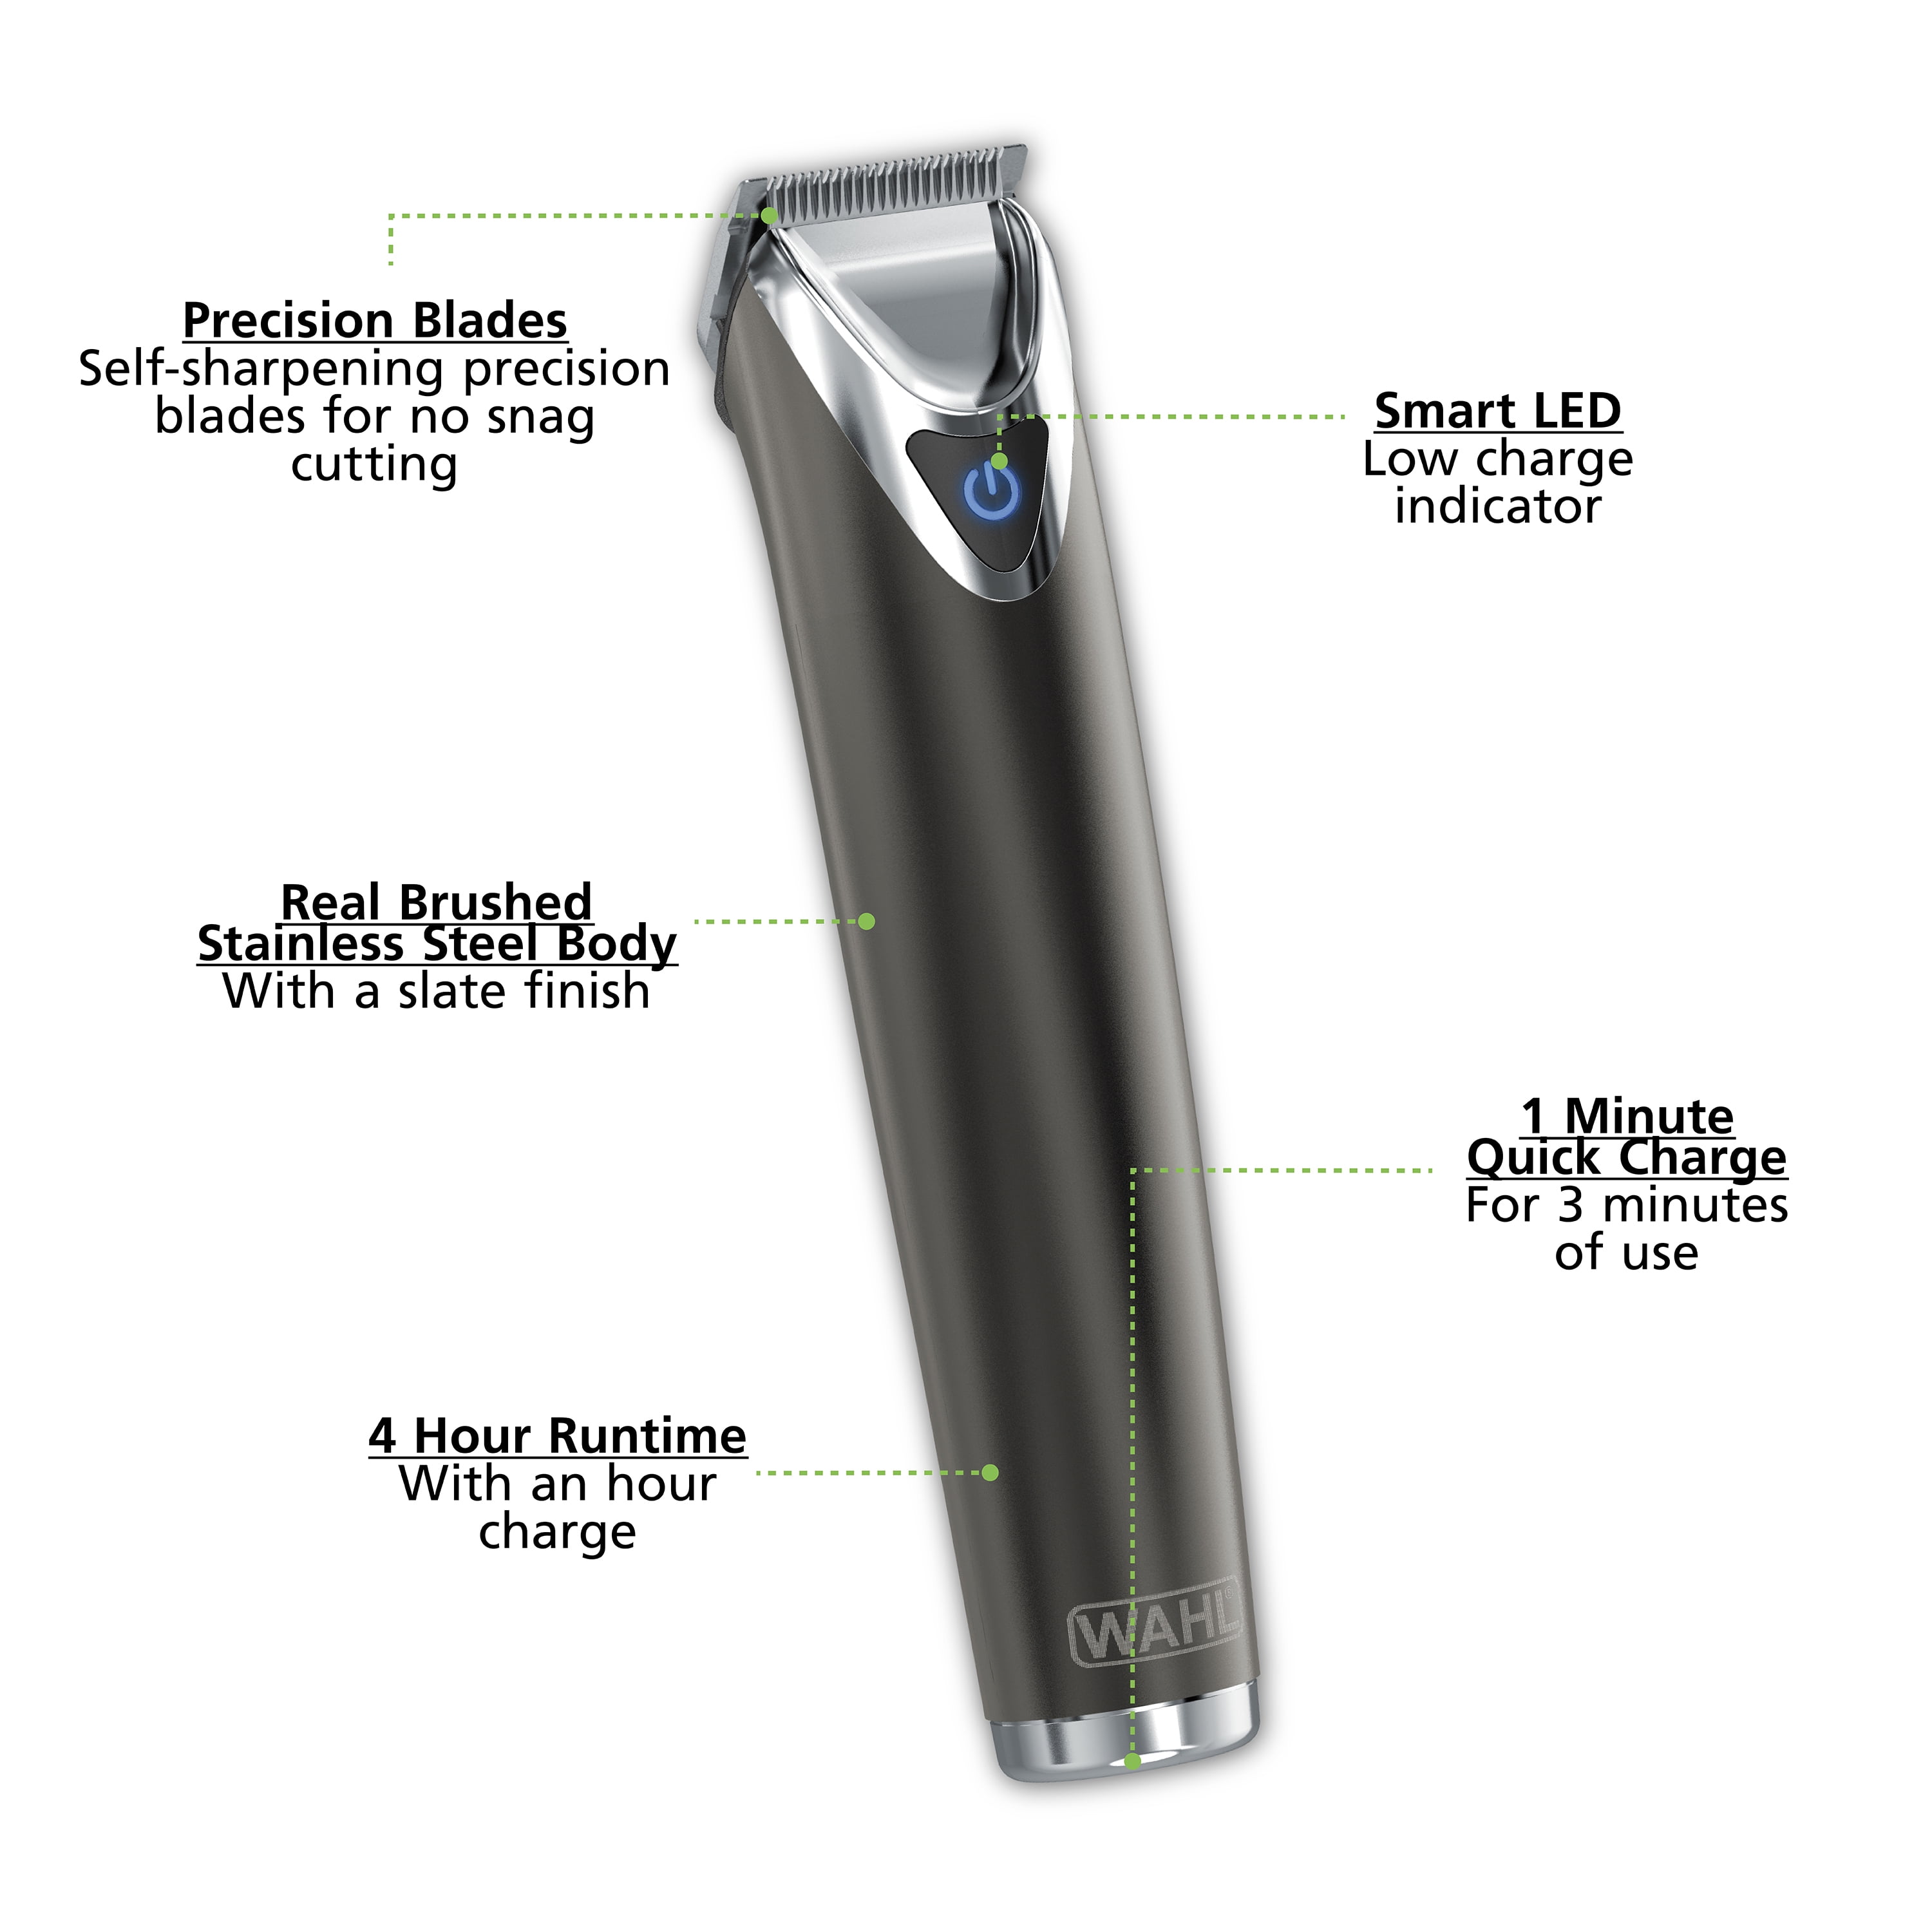 LED Trimmer Li-Ion Model 9864-100 Smart Charge Beard with Wahl Low Smart Trim, Indicator, Rechargeable